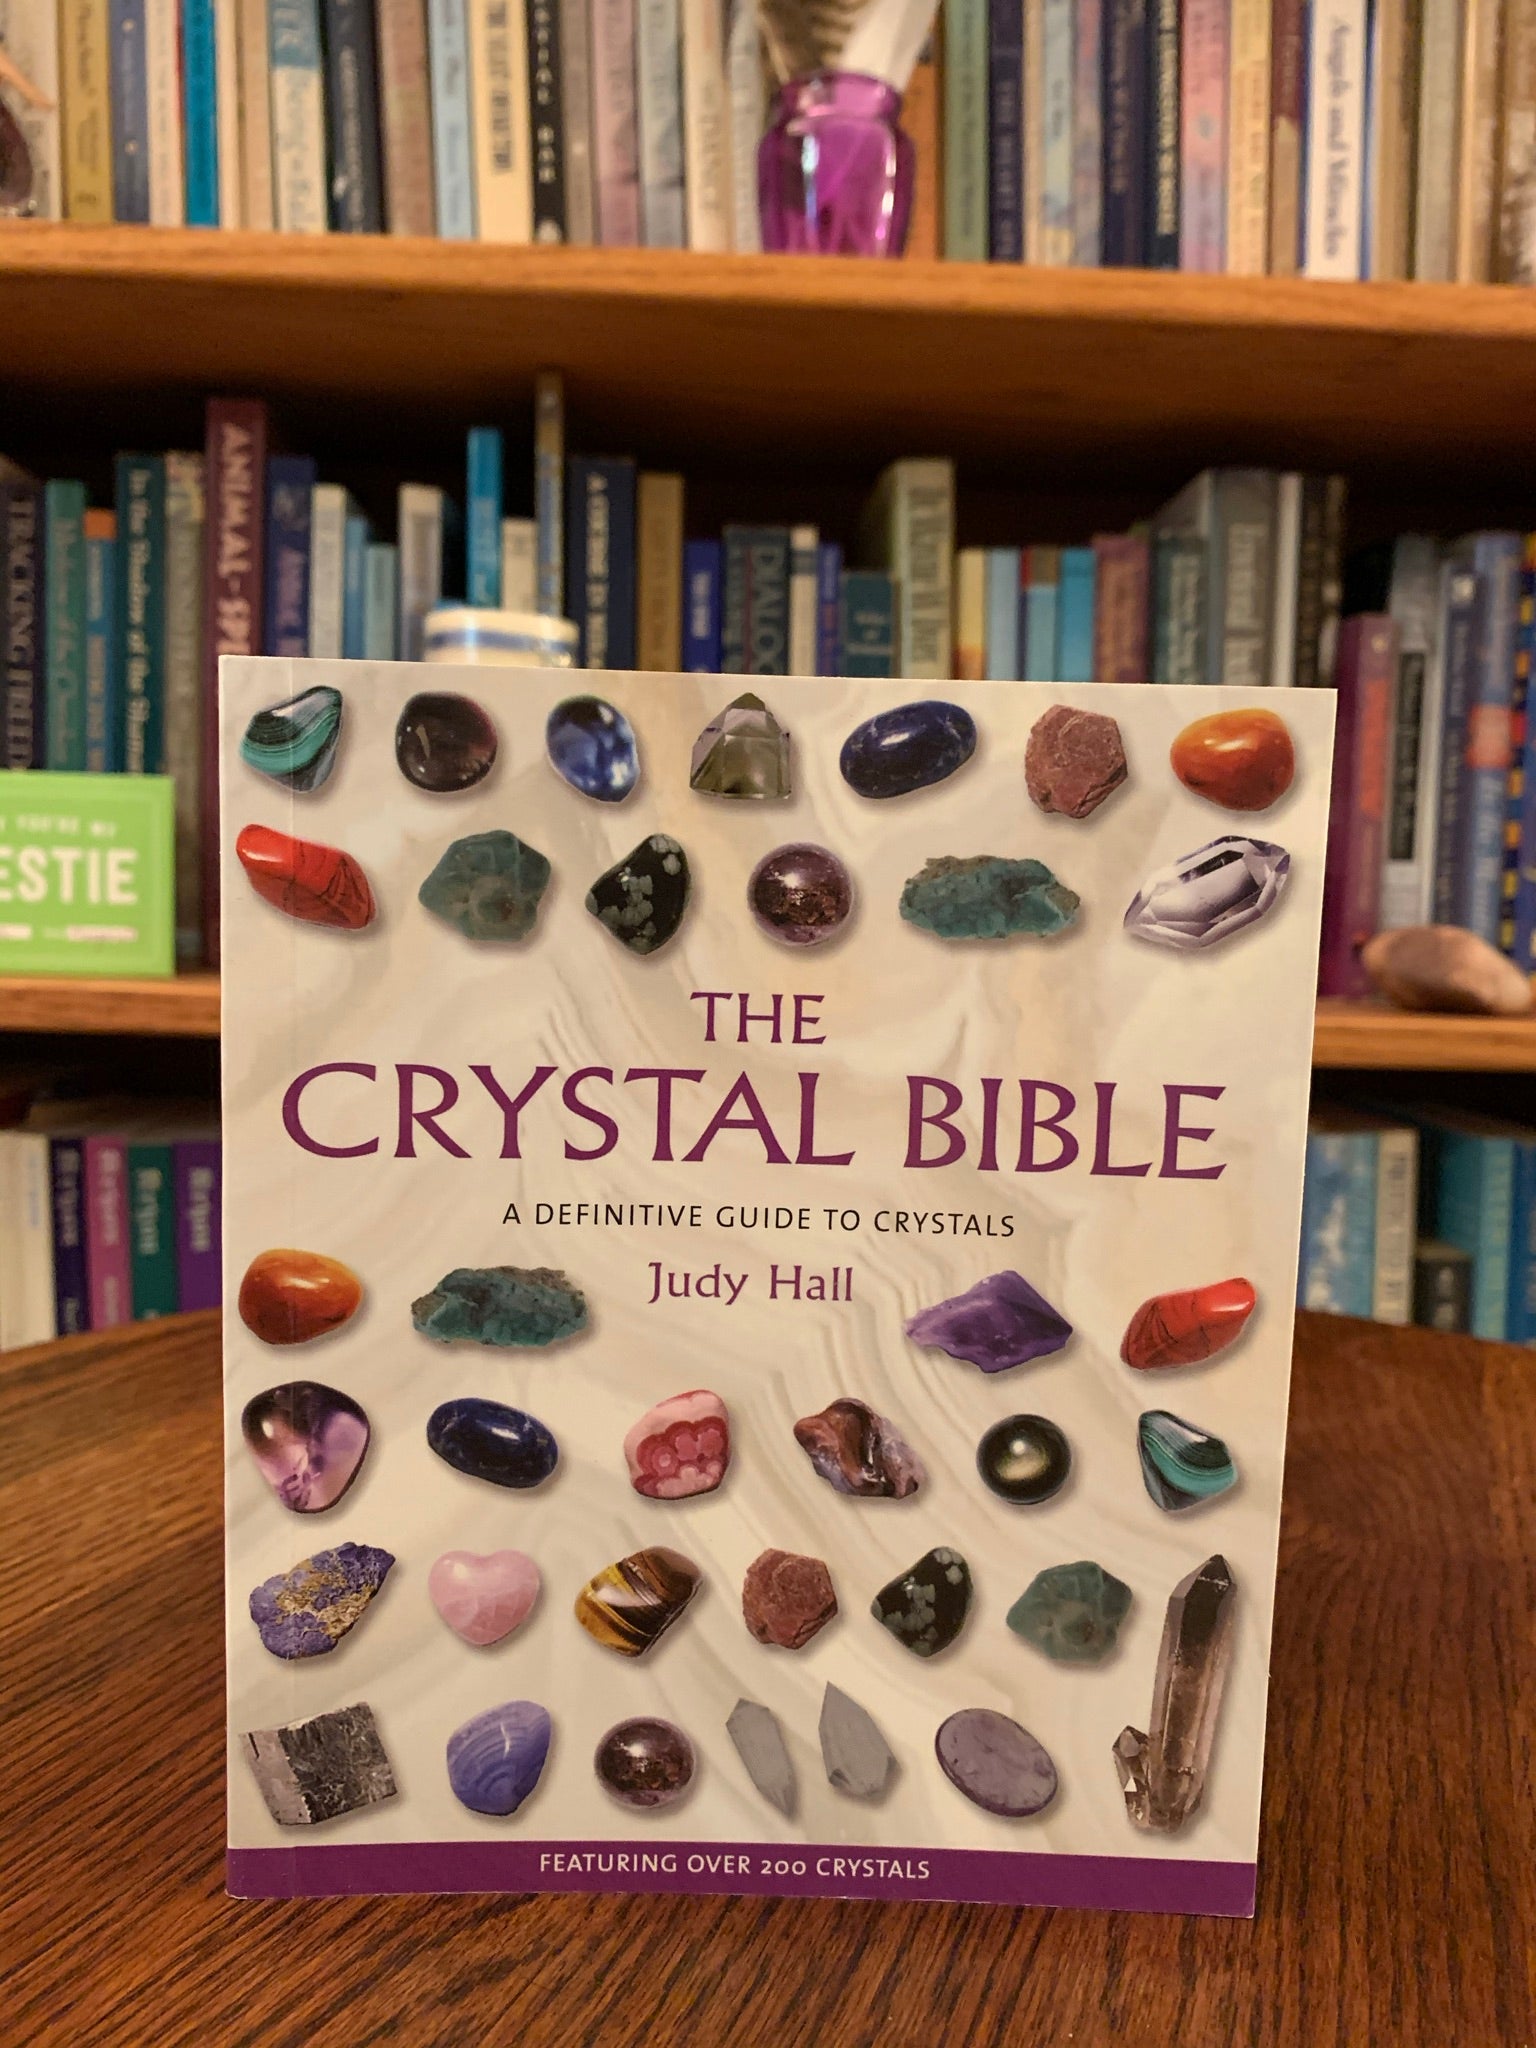 Close-up view of the front cover. The Crystal Bible is a comprehensive book about crystals and gemstones by Judy Hall, an expert in the field. It is 400 pages long and is made with high quality paper. Most of the book is devoted to in depth descriptions of the esoteric and practical properties of stones and crystals, but she also includes sections on crystal care, crystal healing, crystal formation, etc. She has 3 separate volumes of her crystal Bible books and also a book on crystal healing.